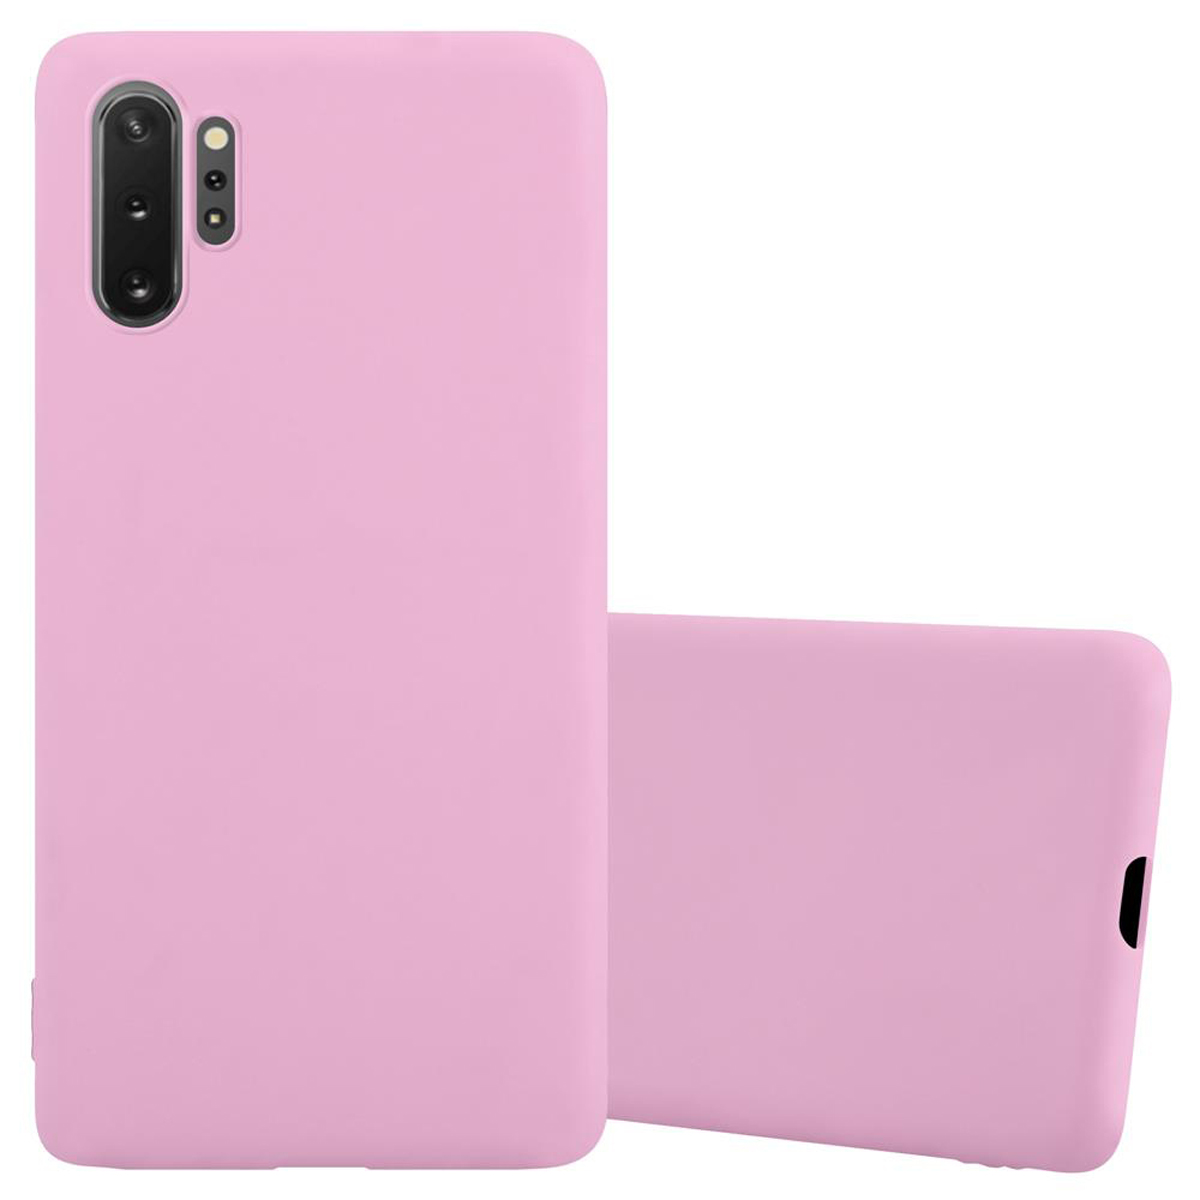 Backcover, CANDY NOTE Style, Candy Galaxy PLUS, CADORABO ROSA Samsung, 10 Hülle TPU im